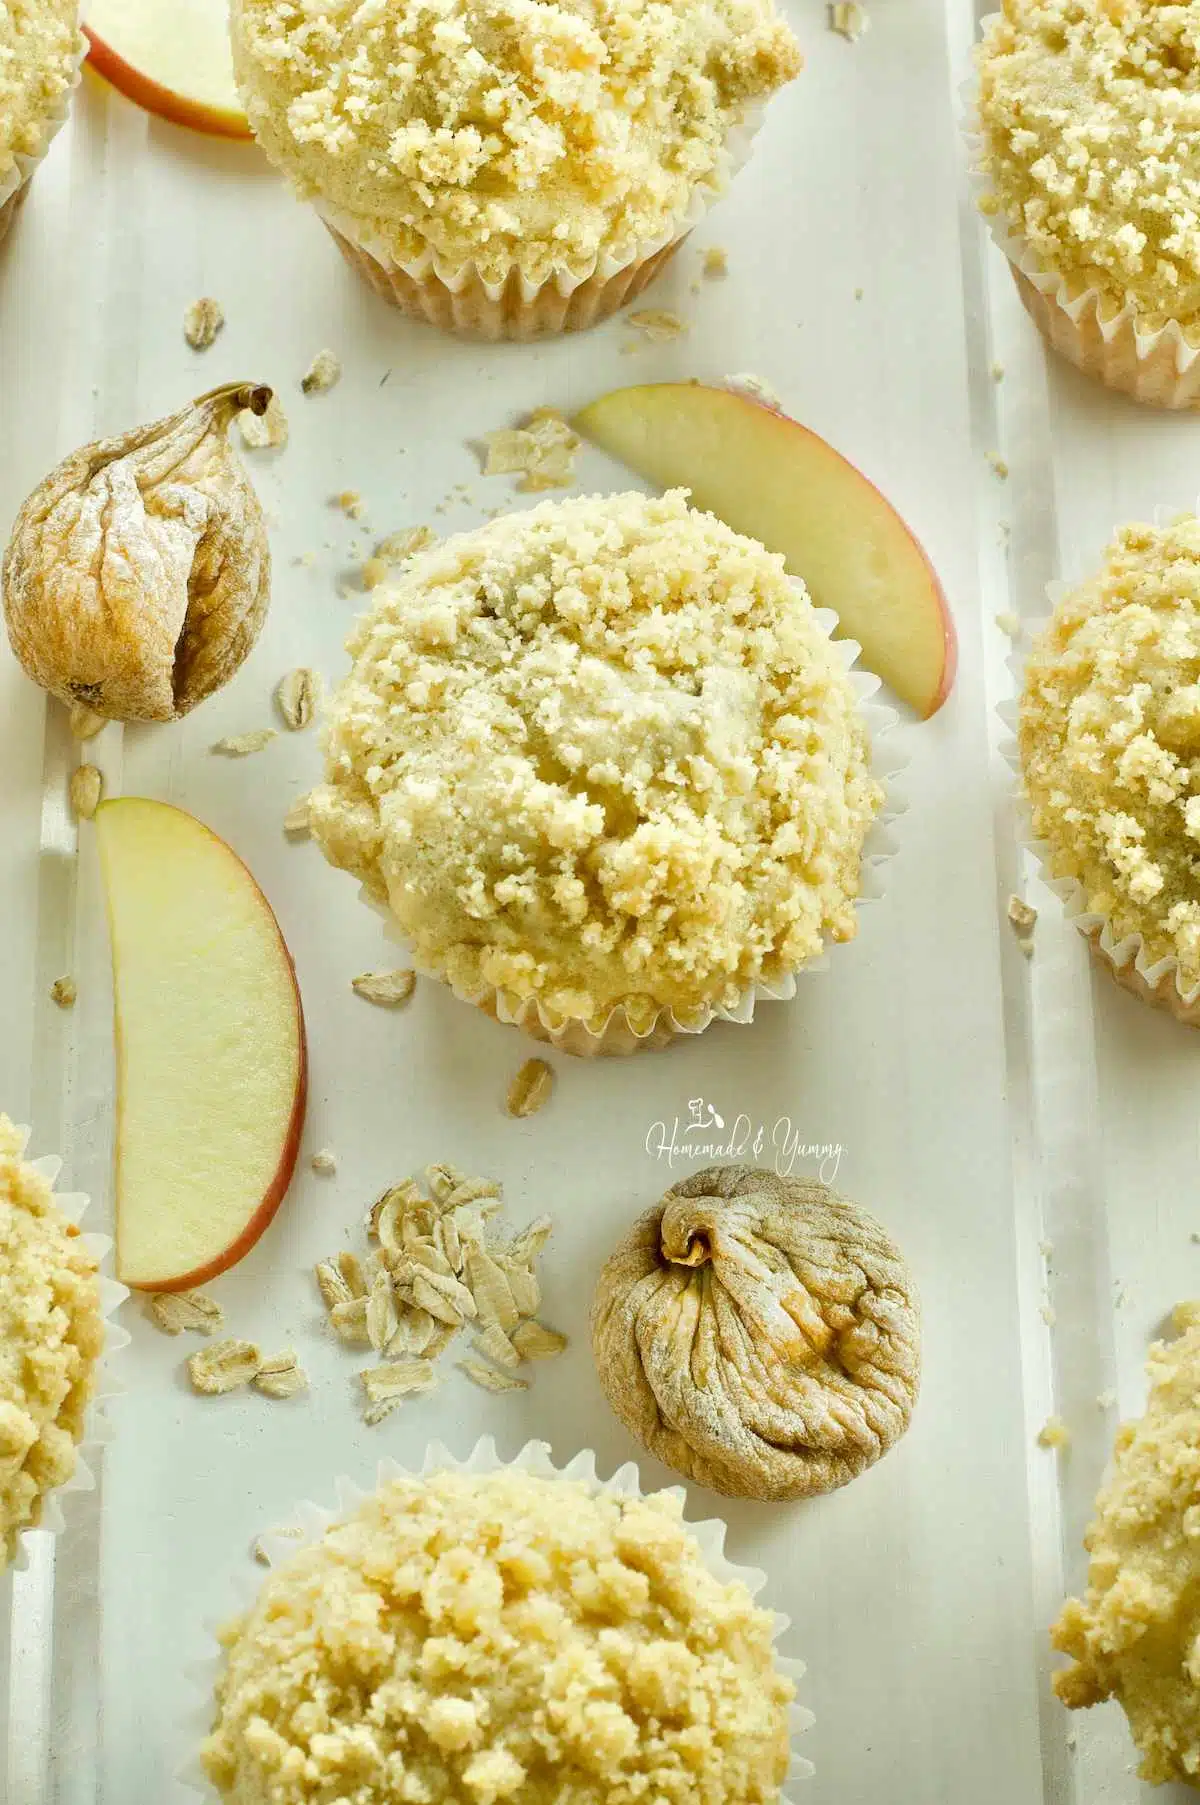 Fresh baked apple oatmeal muffins with figs and crumb topping.